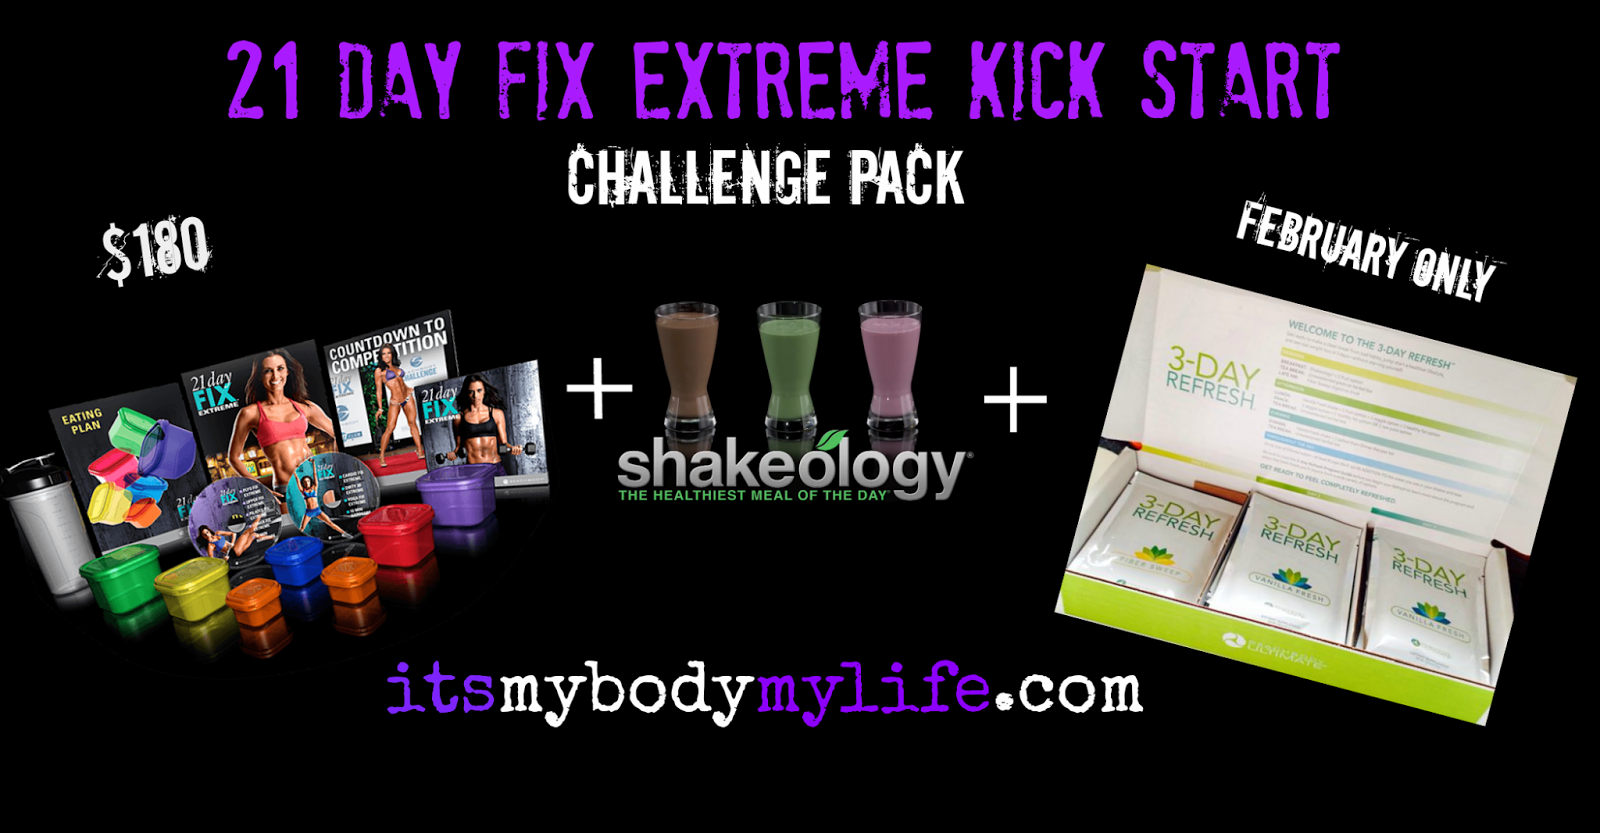 21 day fix extreme kick start, challenge pack, 3 day refresh, 21 day fix extreme, 